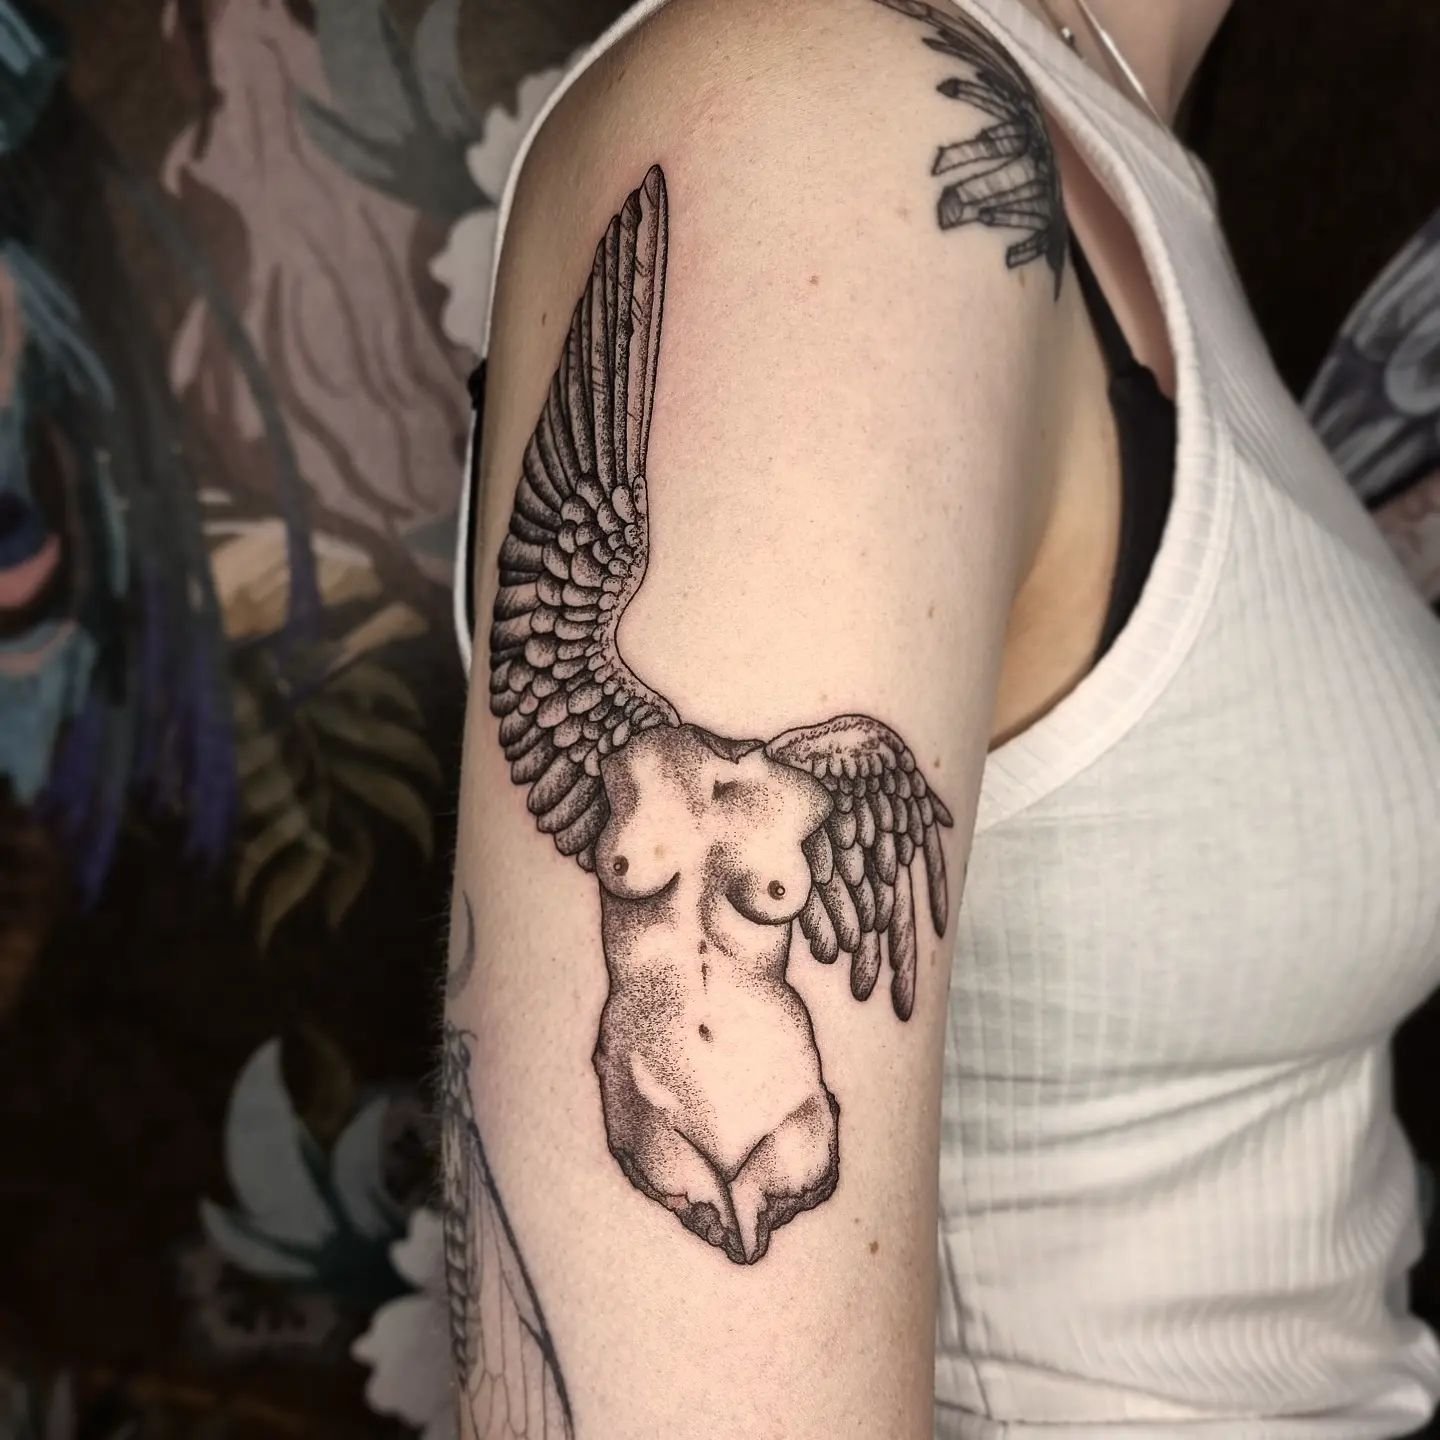 A broken angel for @h.k.tubb Thank you so much for getting this tattooed, it fits so well on your arm ❤️❤️
.
.
.
.
.
#angeltattoo #mythologytattoo #illustrativetattoo #illustrationtattoo #melbournetattooist #melbournetattoo  #dotworktattoo #blackandg